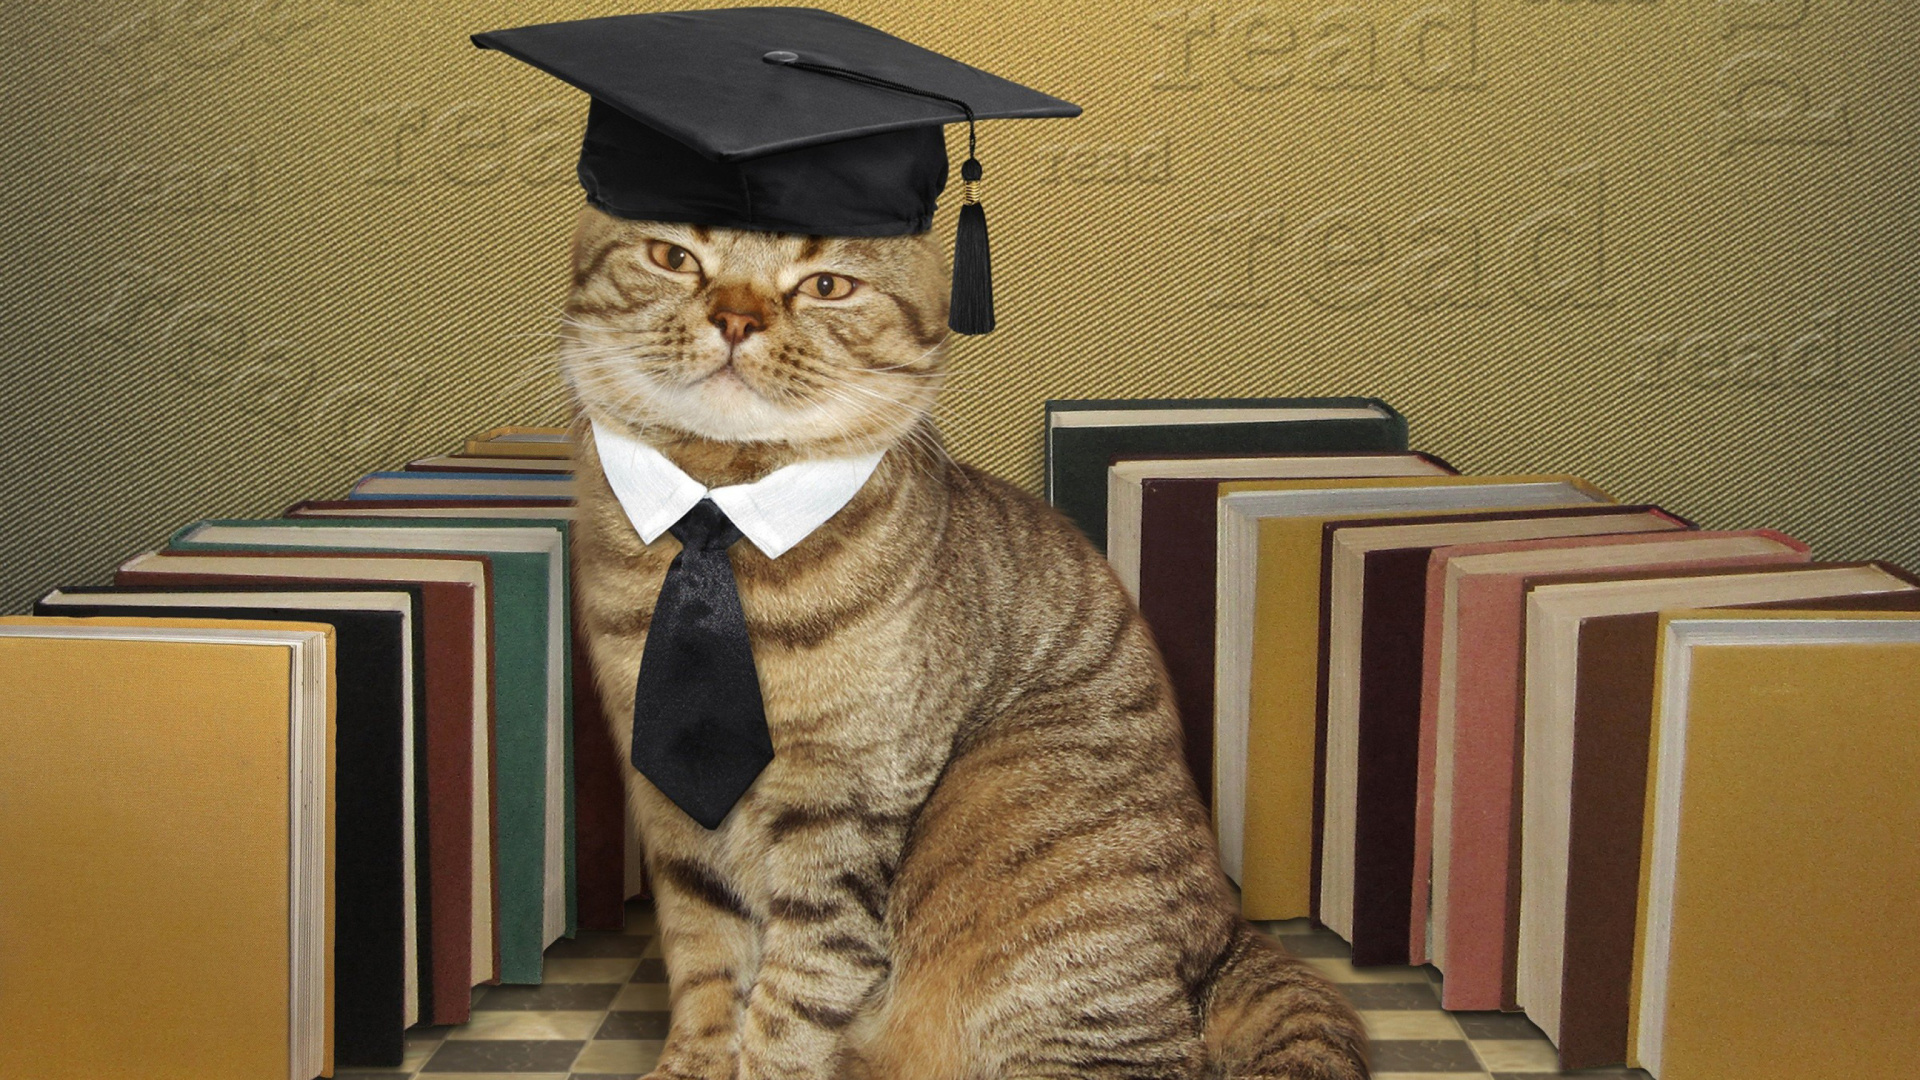 Clever cat with Books screenshot #1 1920x1080